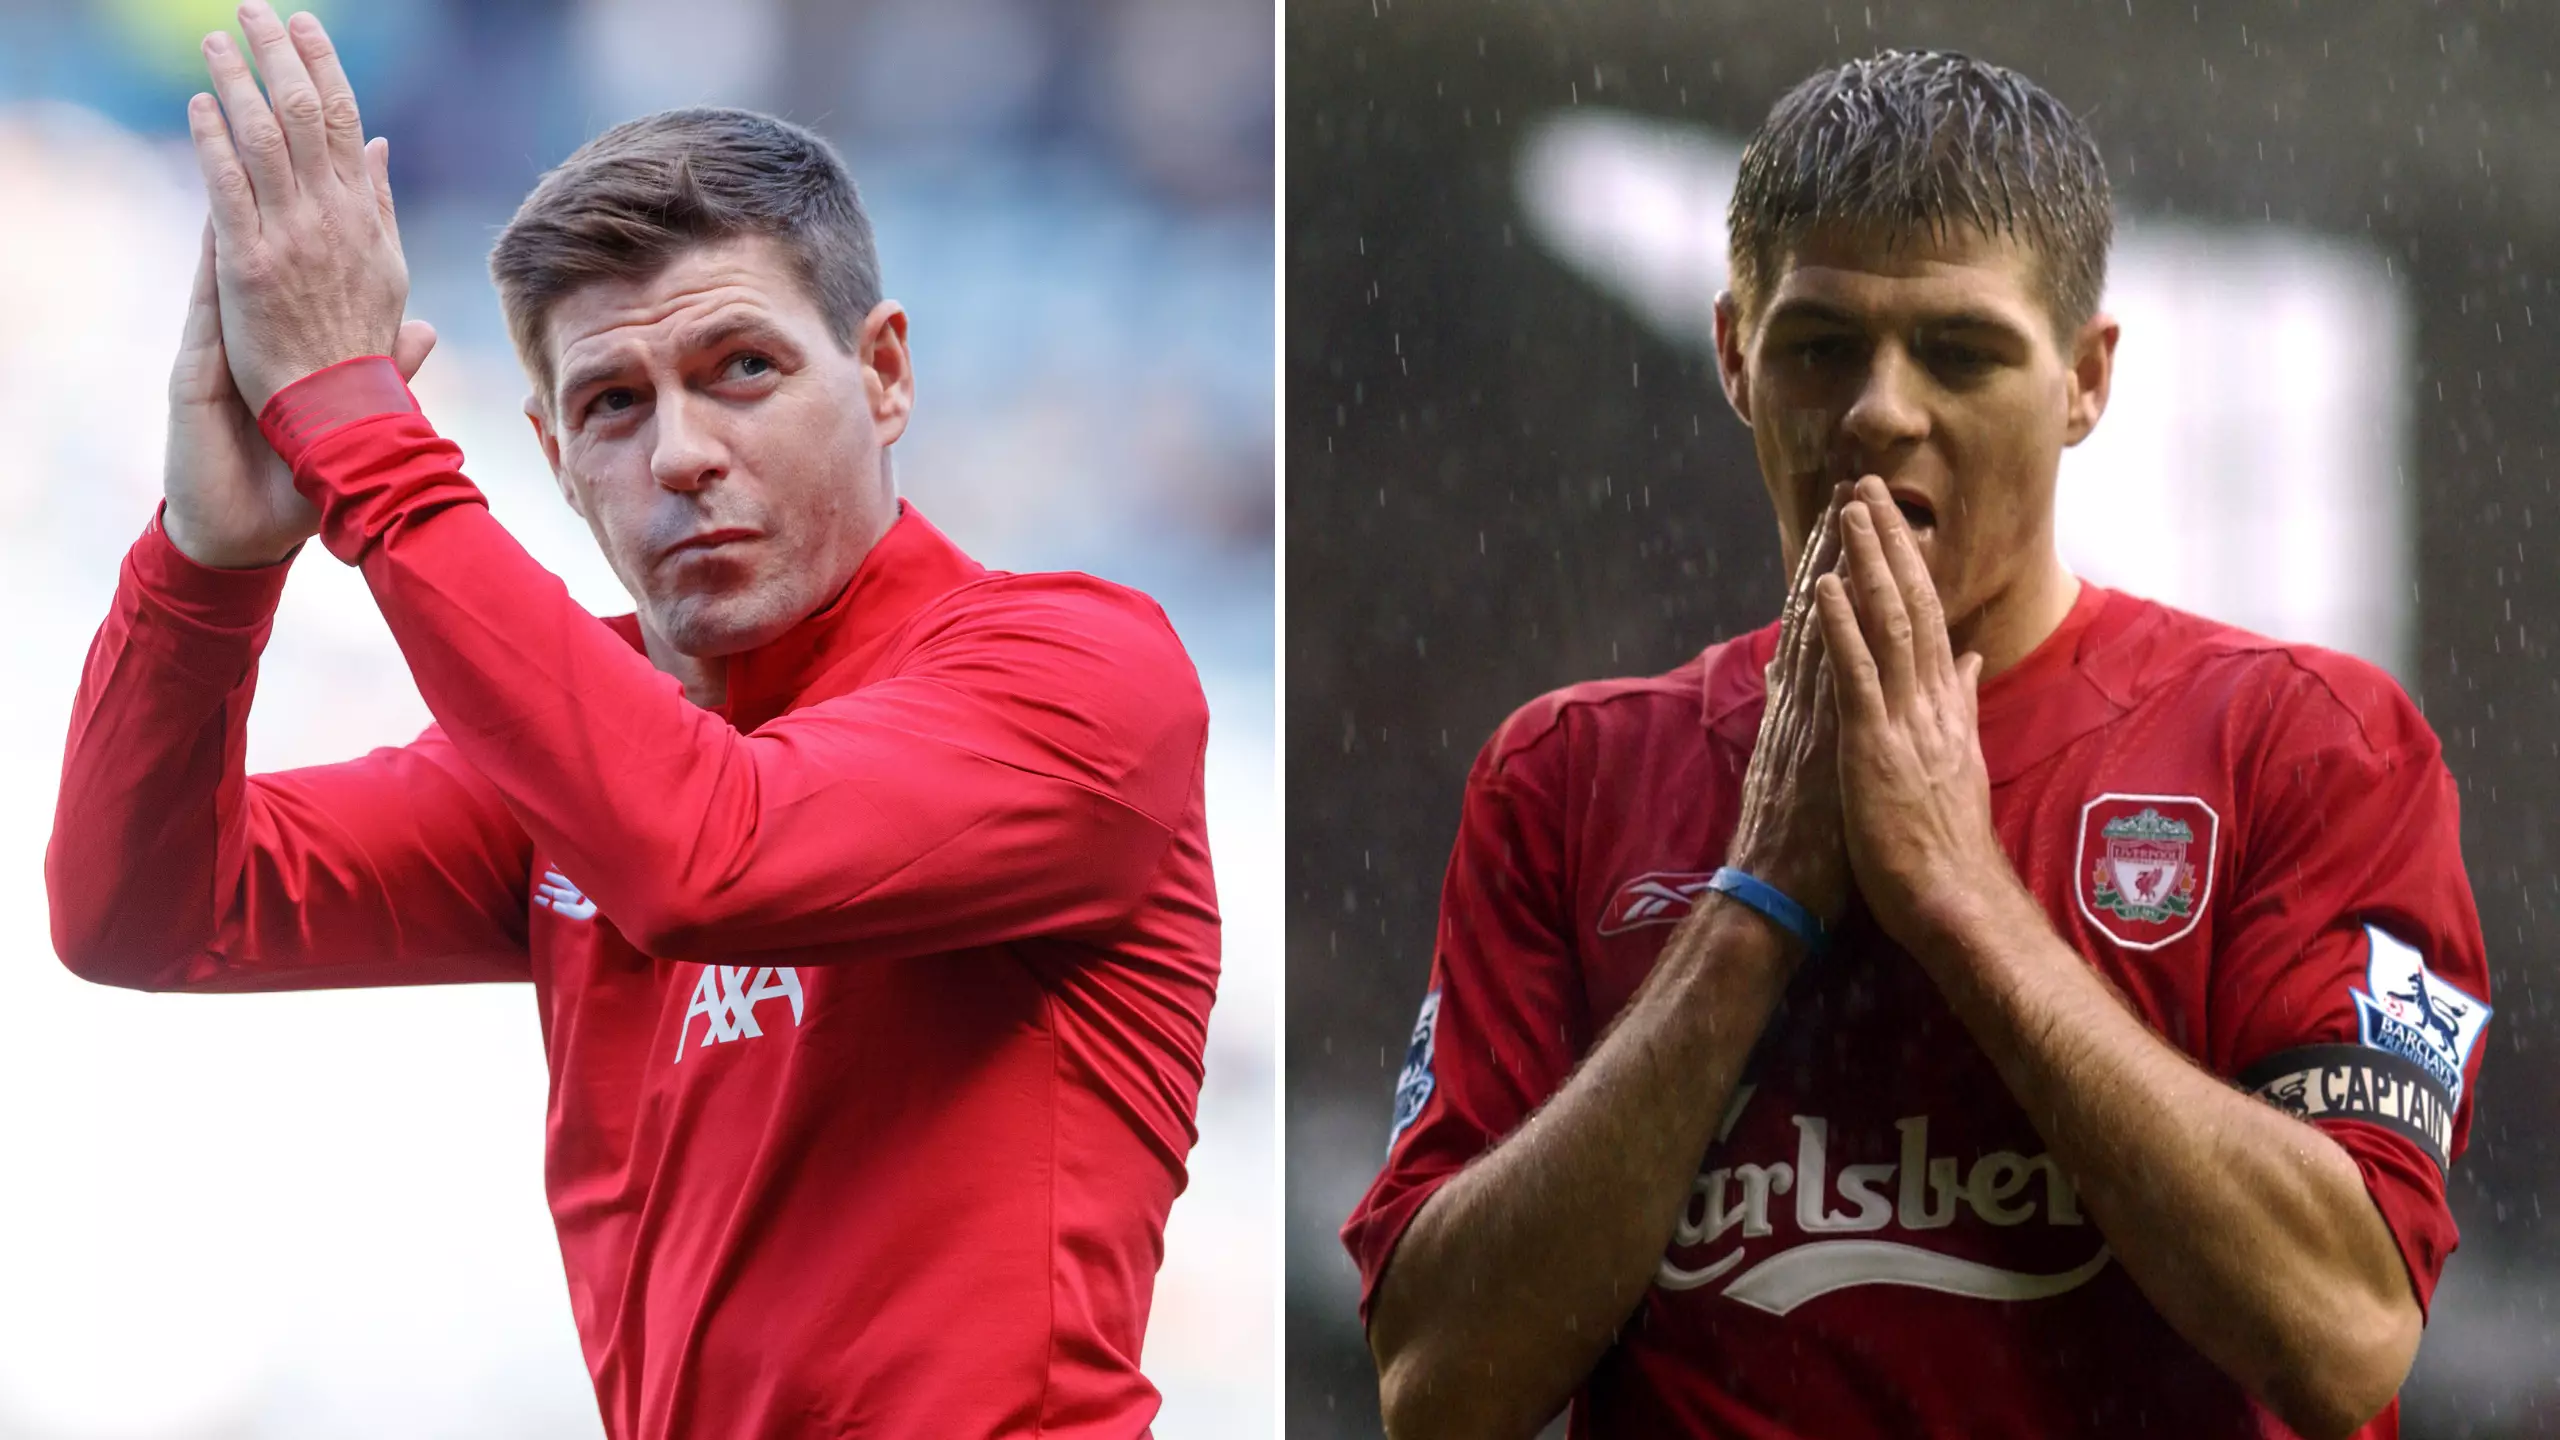 Former Teammate Of Steven Gerrard Passionately Defends His PL Hall Of Fame Induction